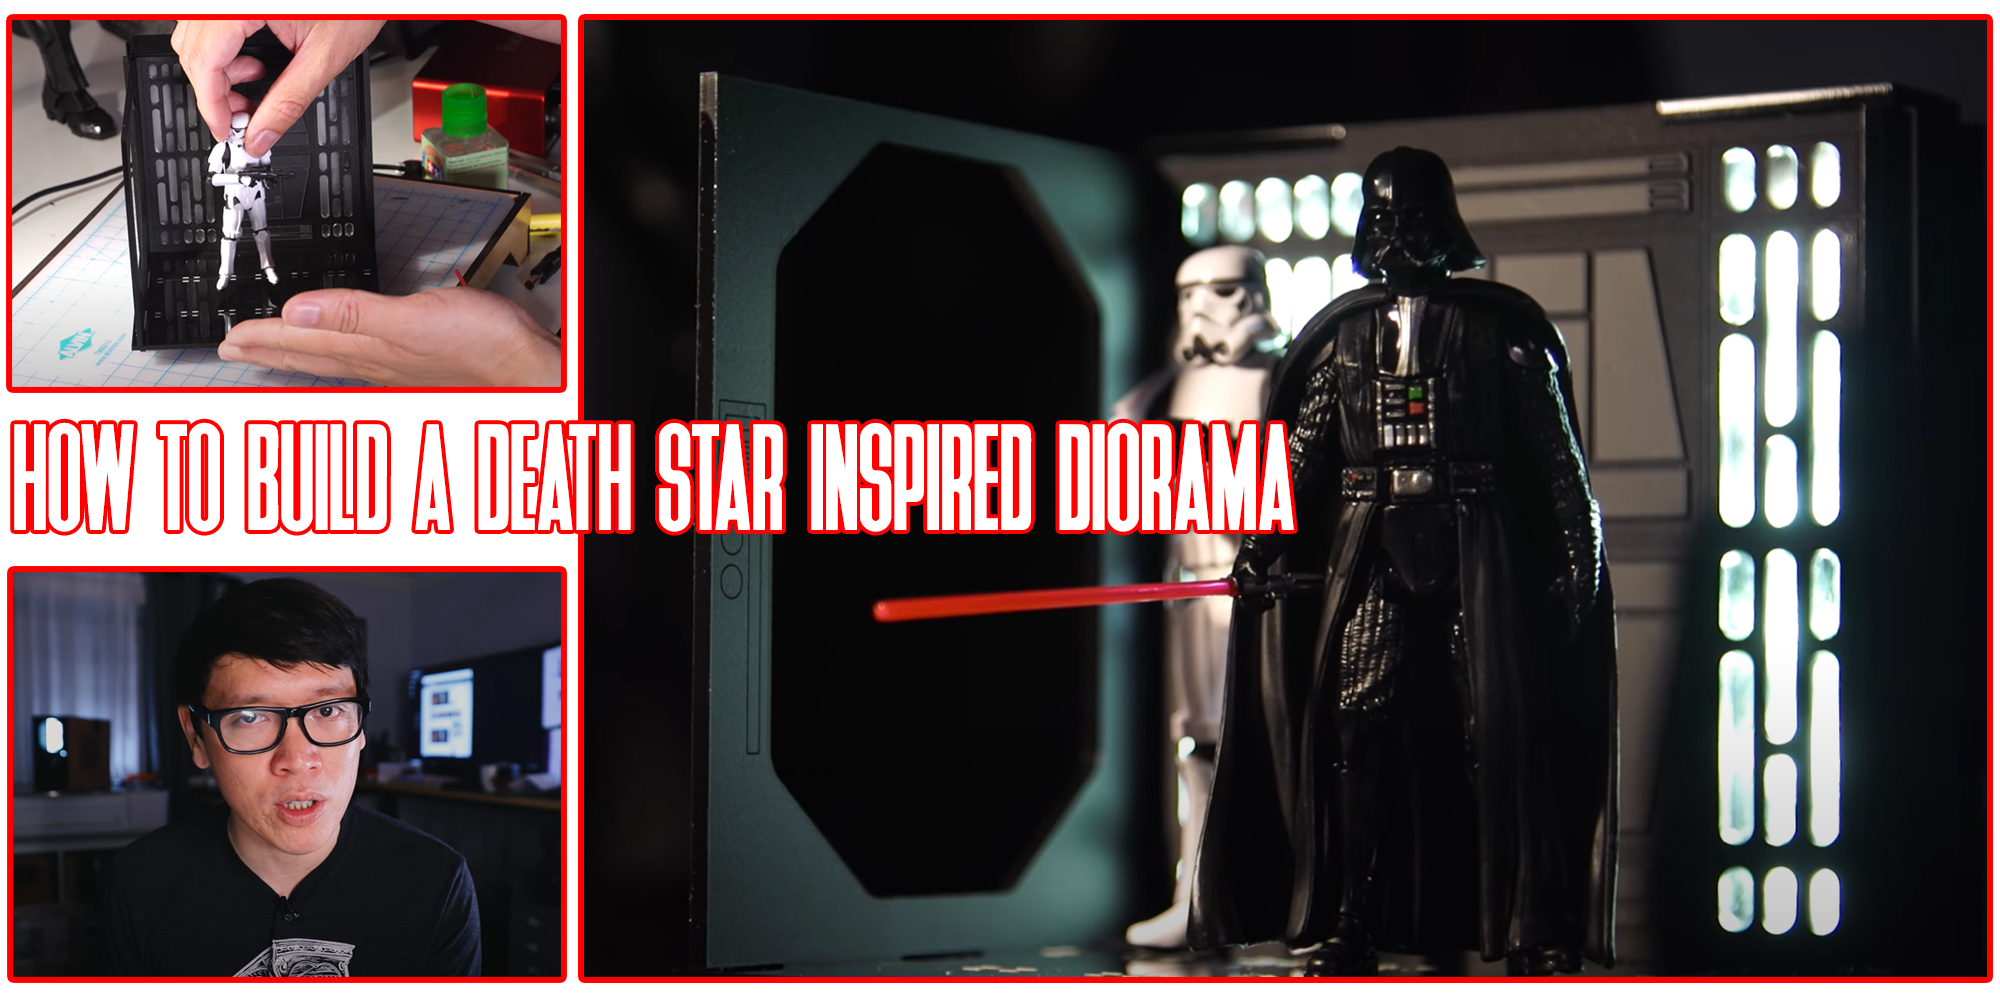 How To Build A Death Star Inspired Diorama